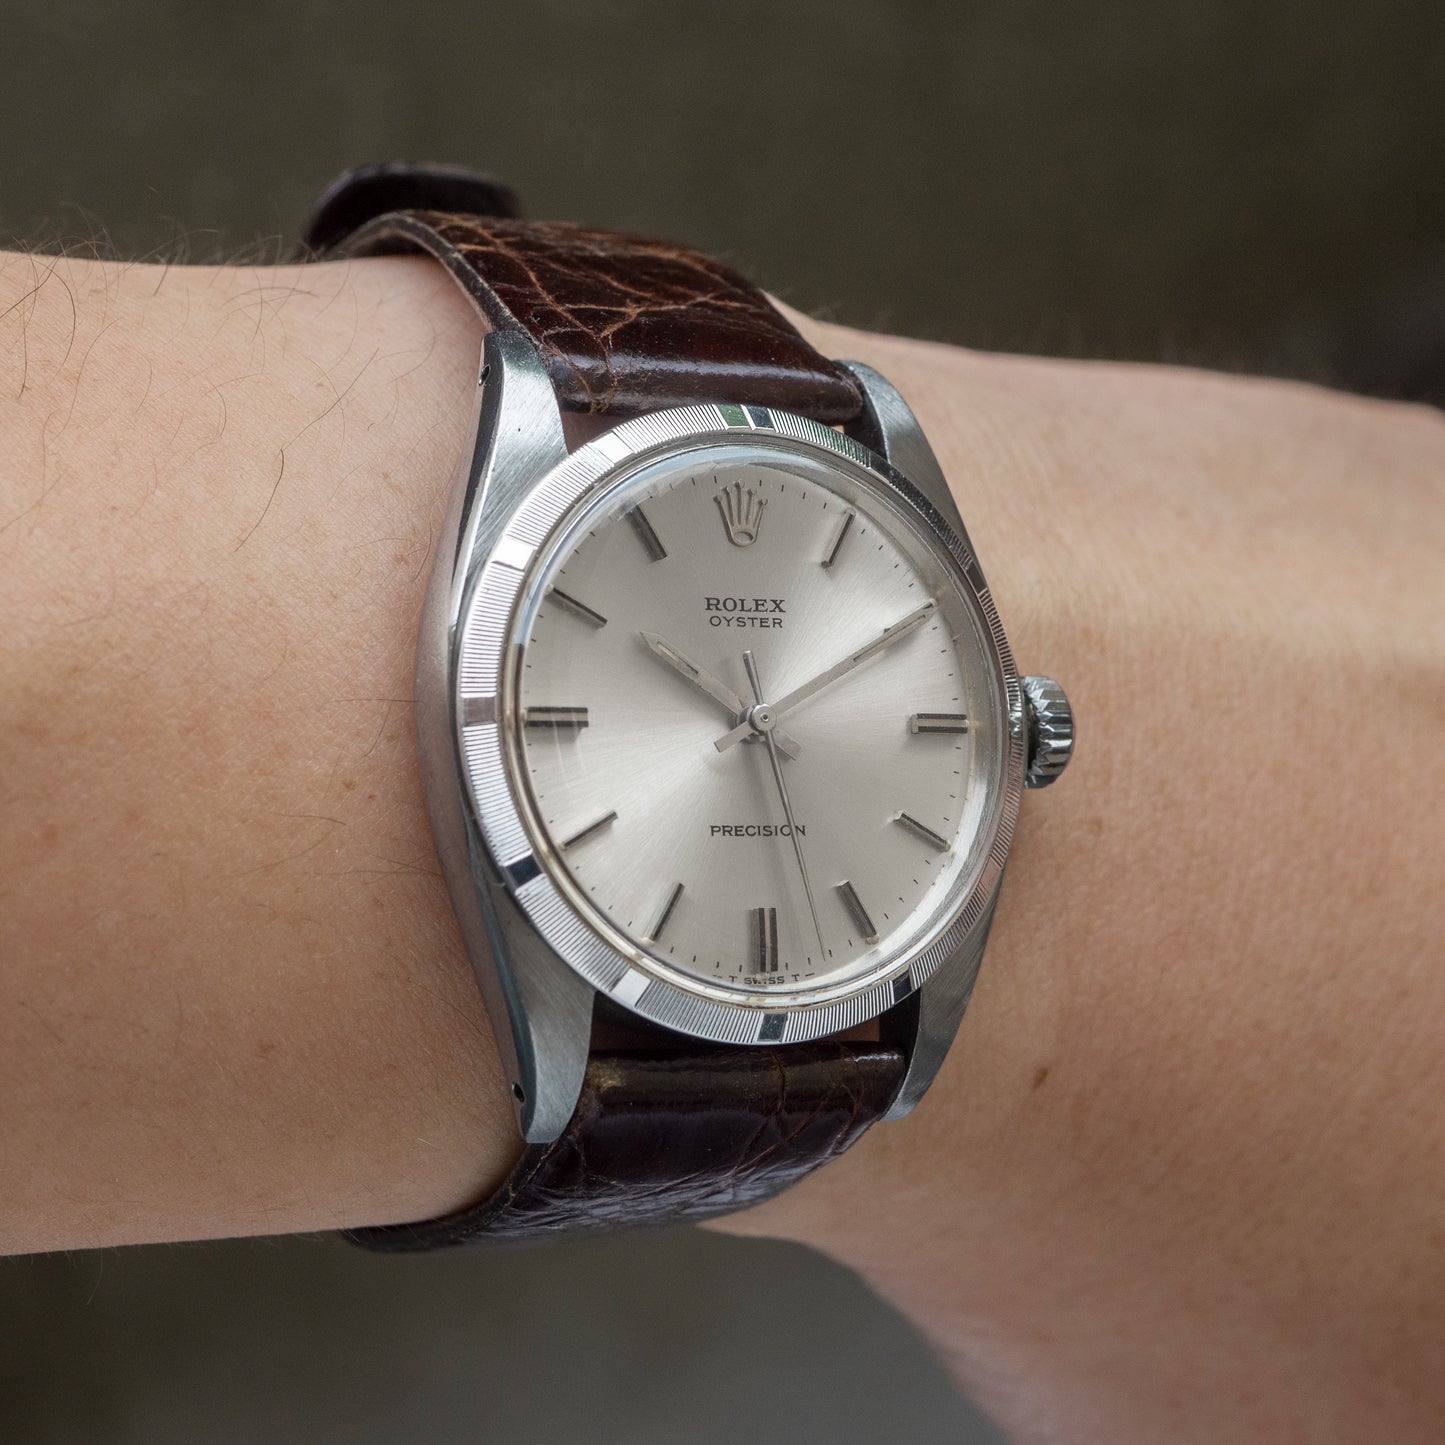 No. 366 / Rolex Oyster Precision with Box and Paper - 1969